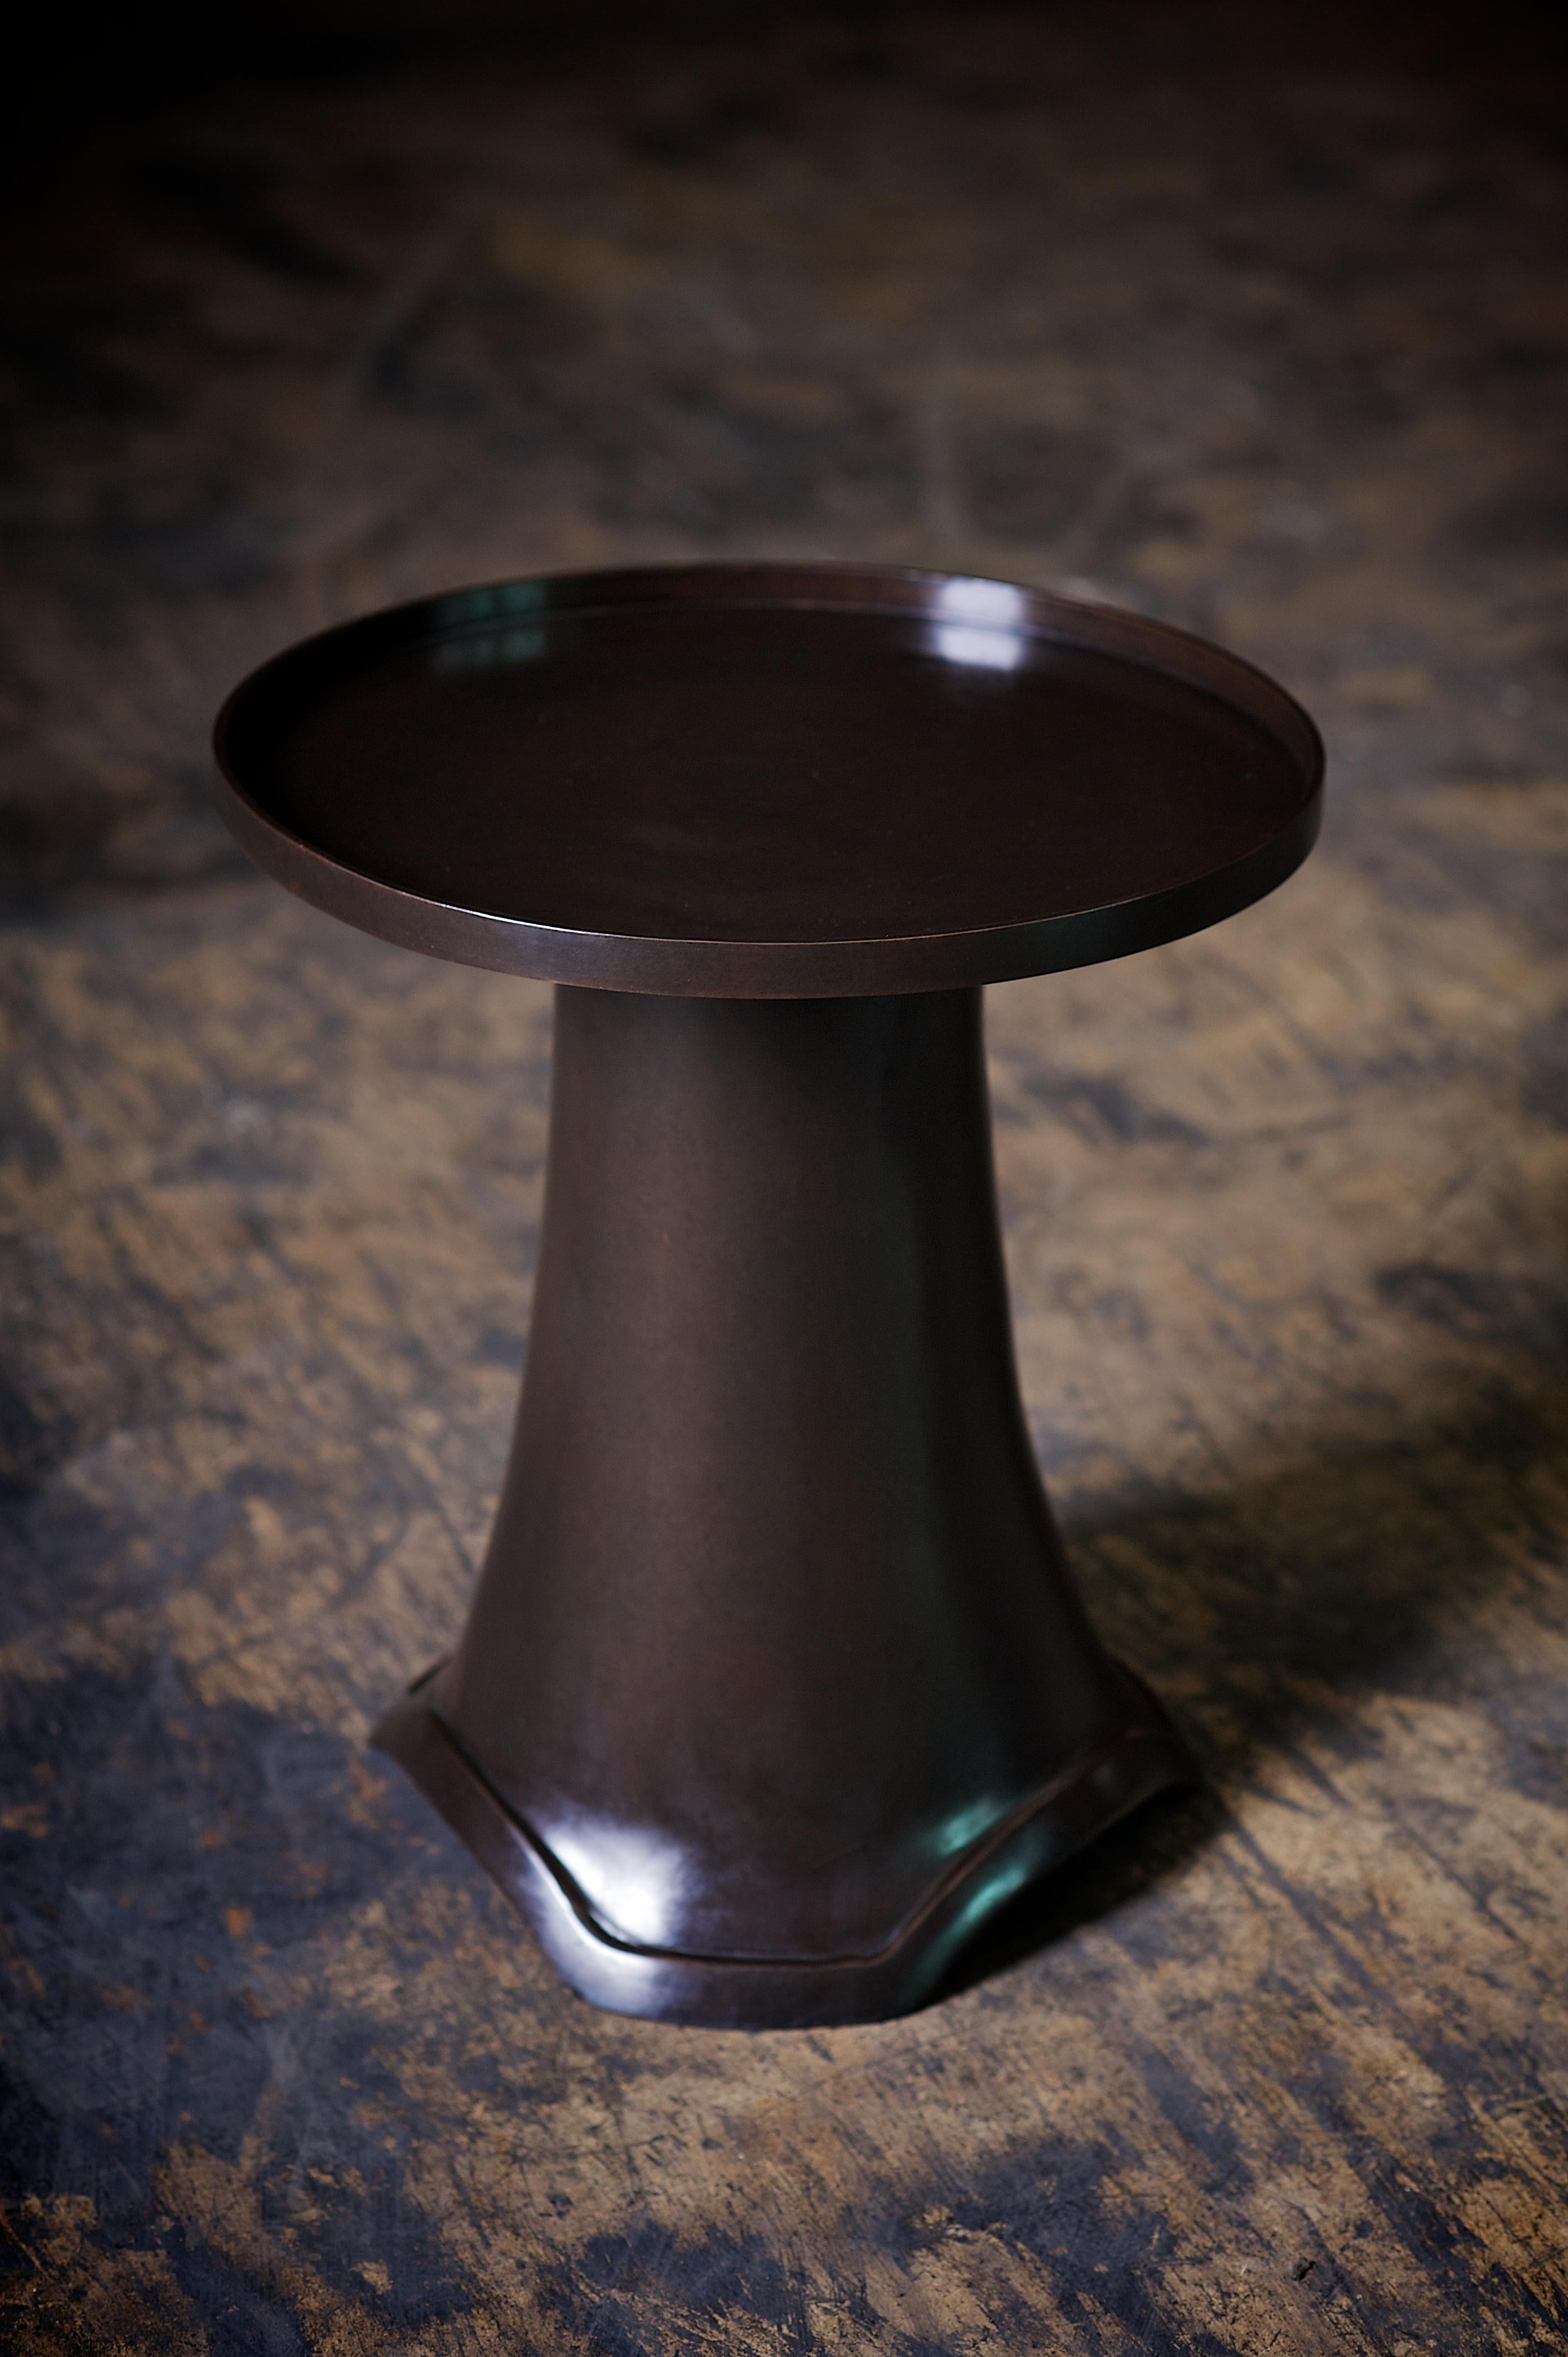 Available now and ready to ship! 

A graceful flow, counterpoised by structured top and pedestal ribbing. Hand-rubbed lost wax cast bronze.

Dimensions/dia 15.7 x h 17.7 in.
 